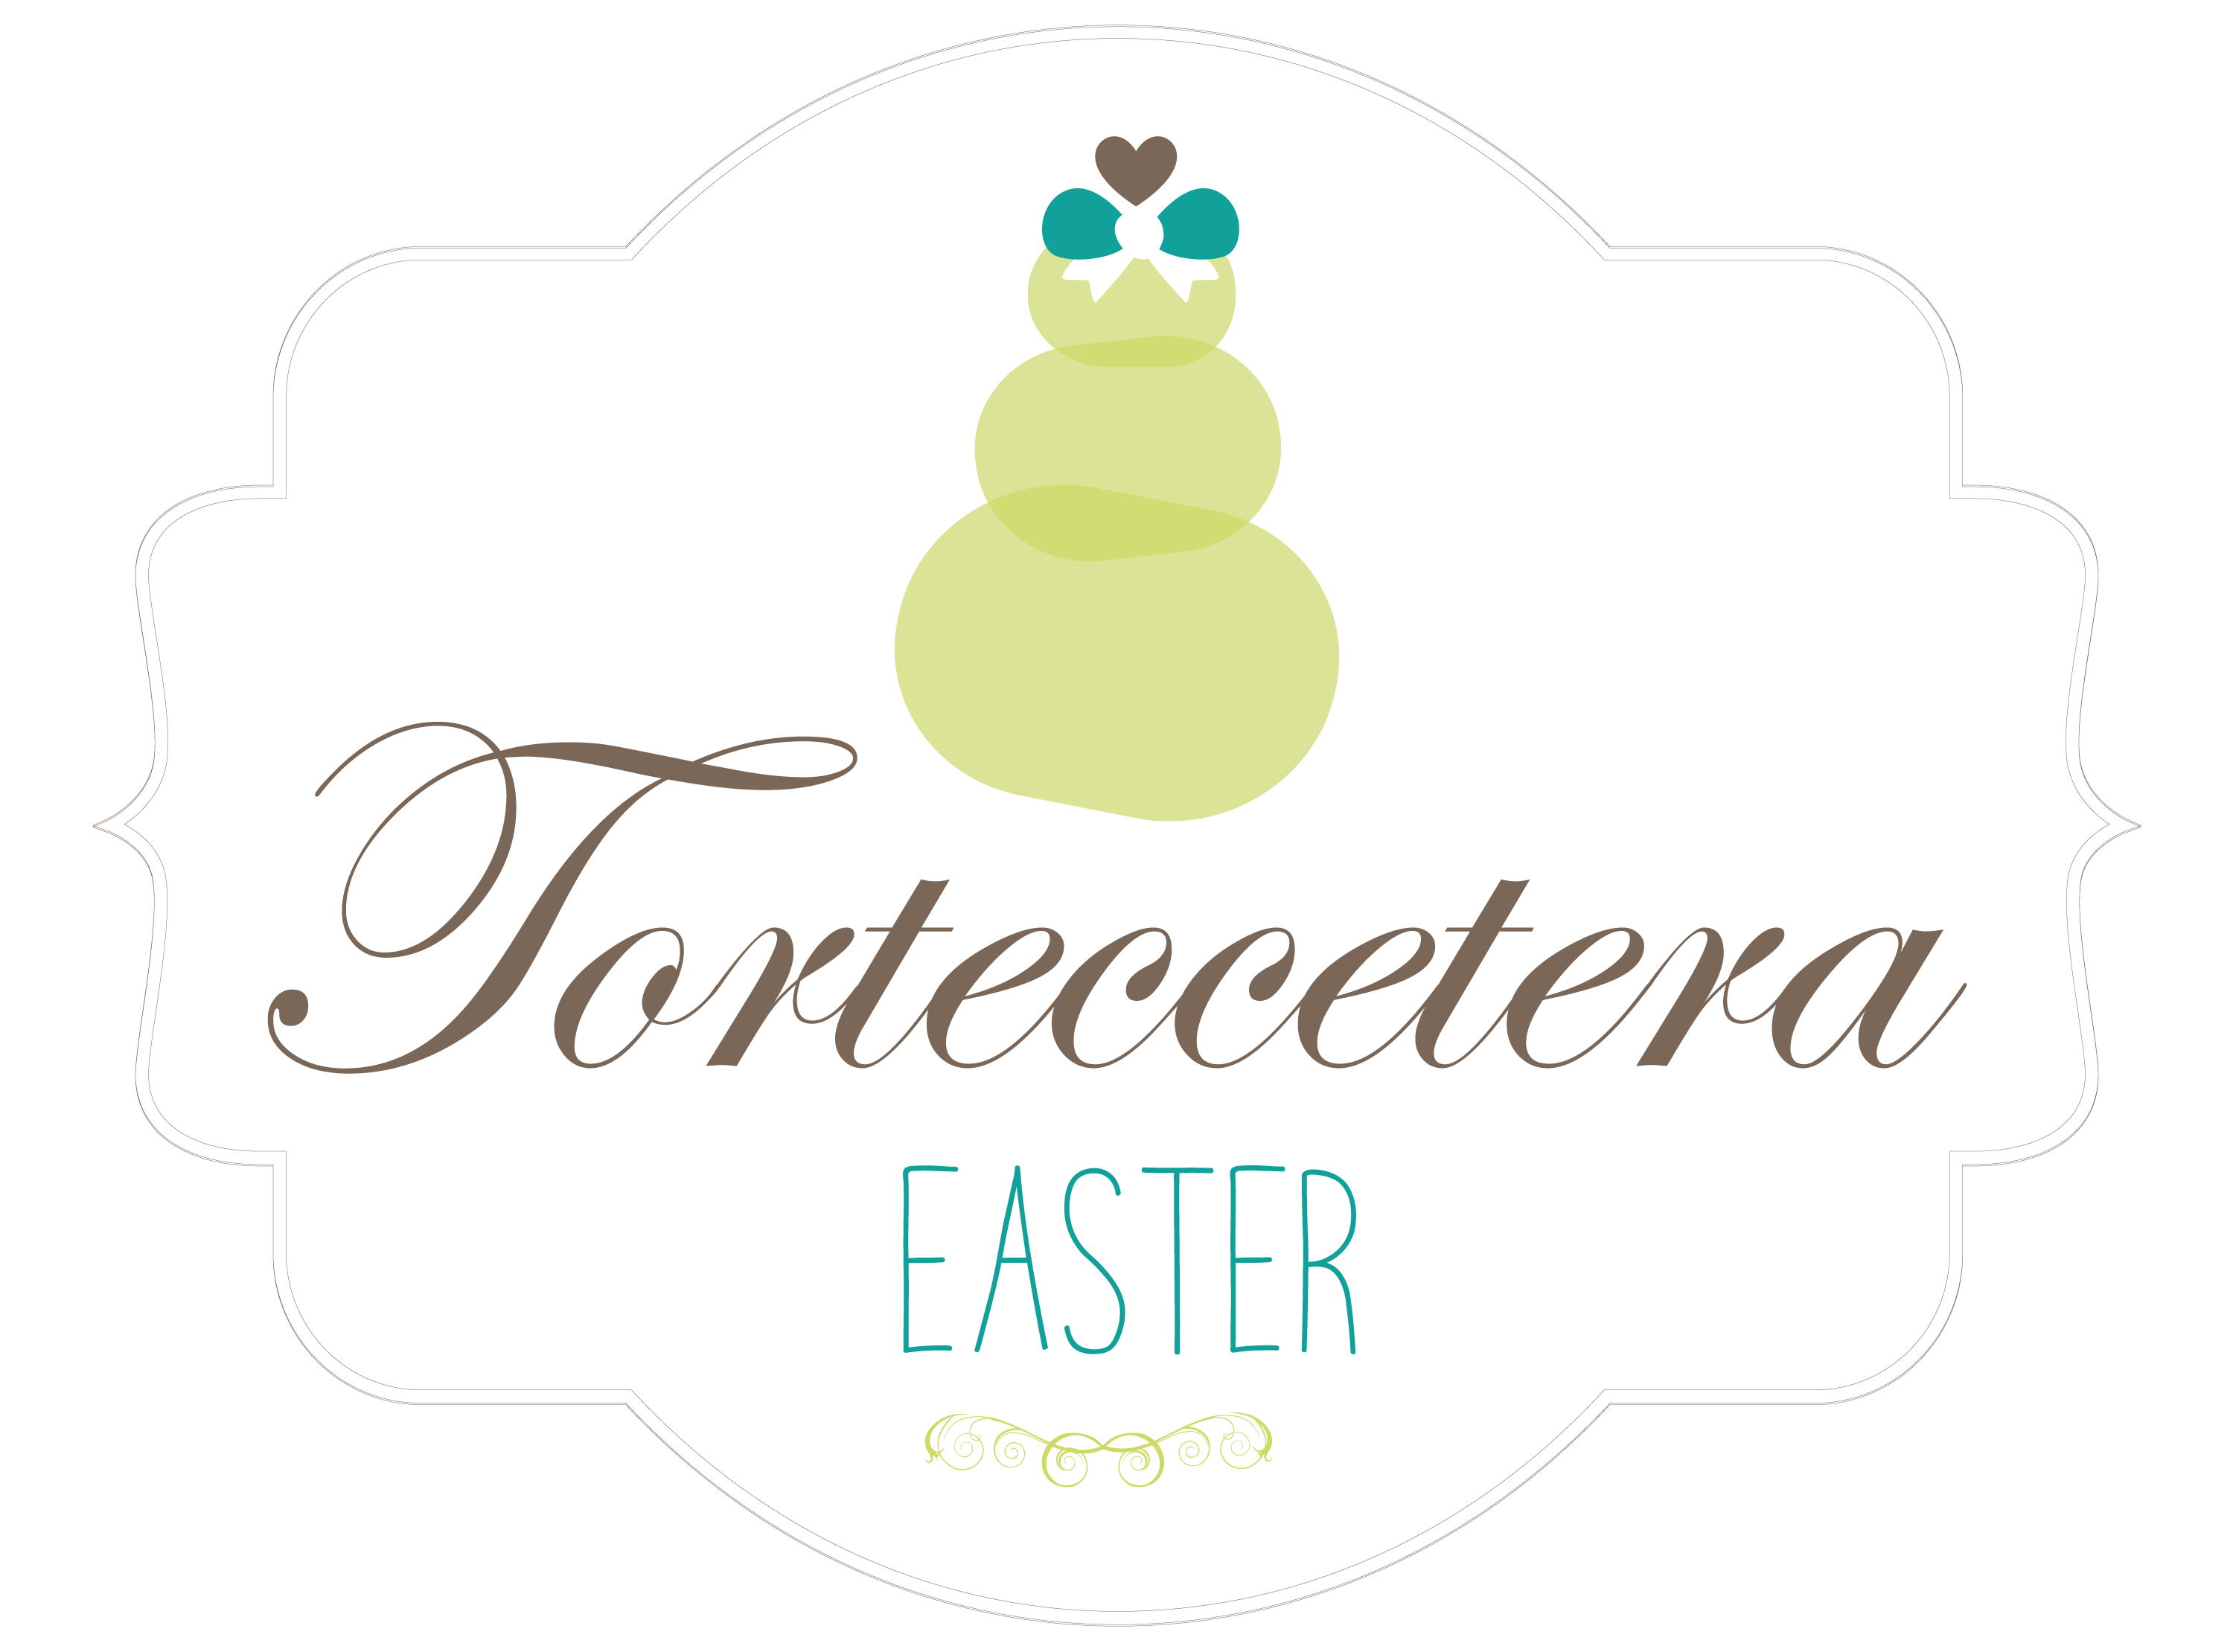 https://www.torteccetera.com/staging/wp-content/uploads/2018/09/Logo_easter2.png